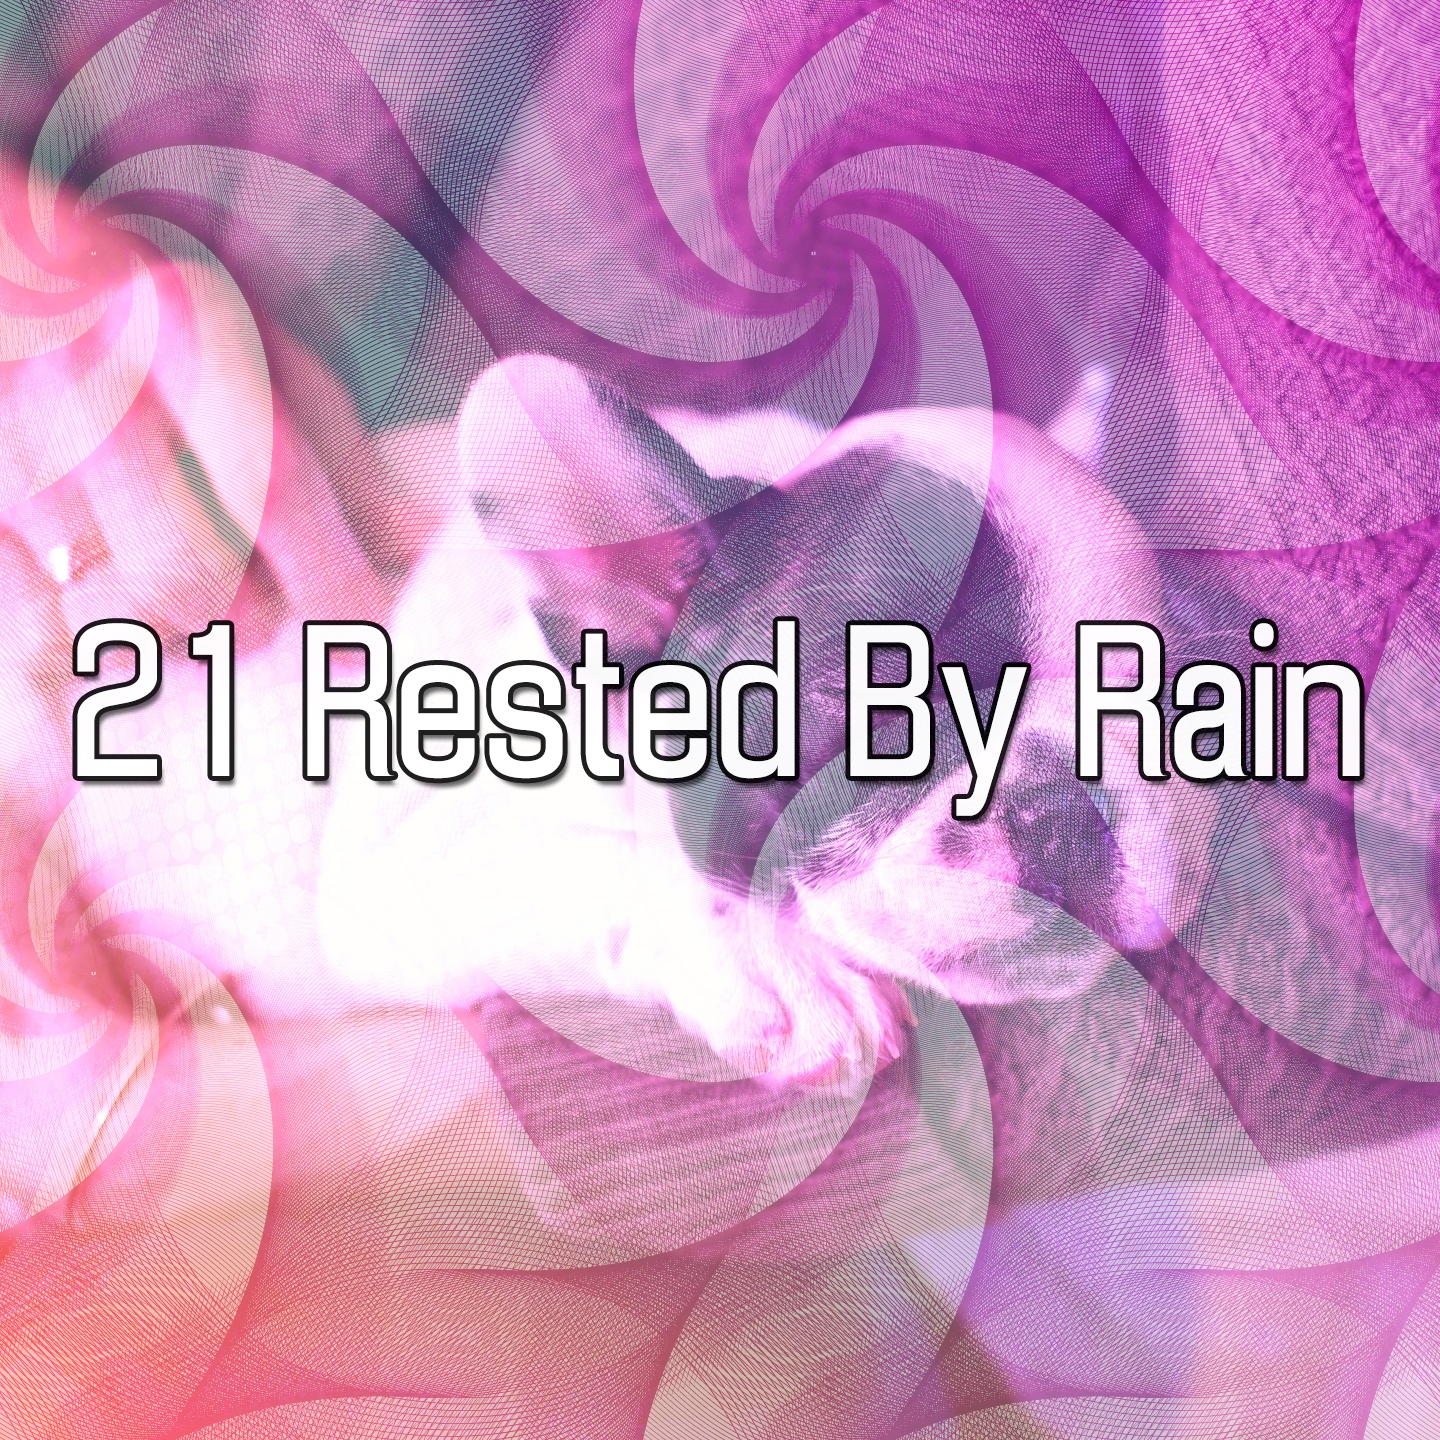 21 Rested By Rain